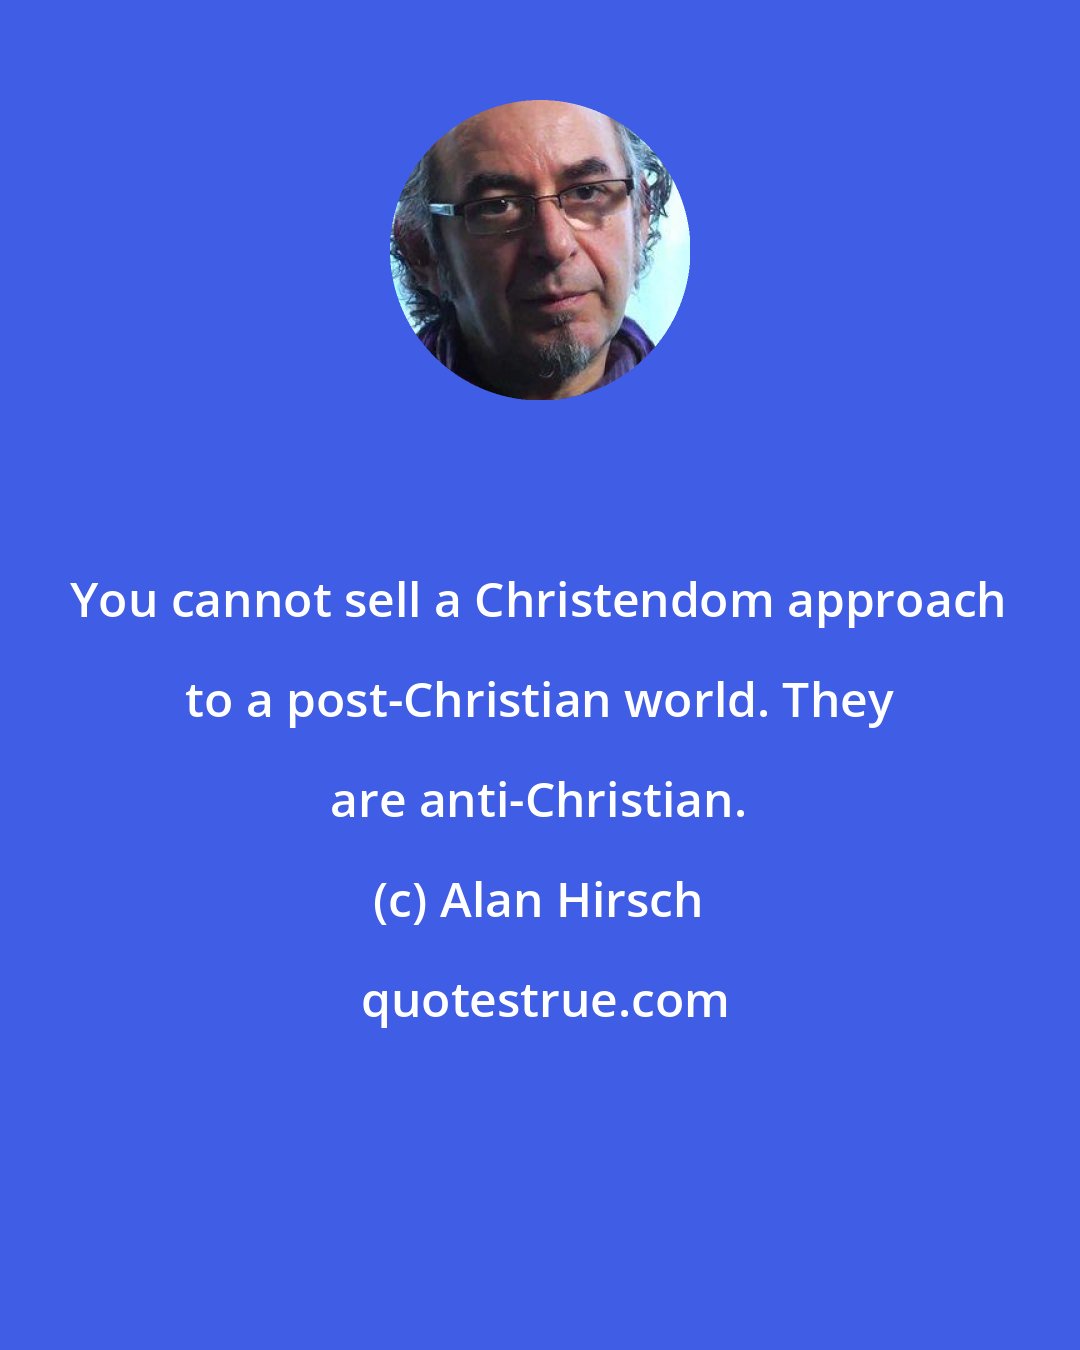 Alan Hirsch: You cannot sell a Christendom approach to a post-Christian world. They are anti-Christian.